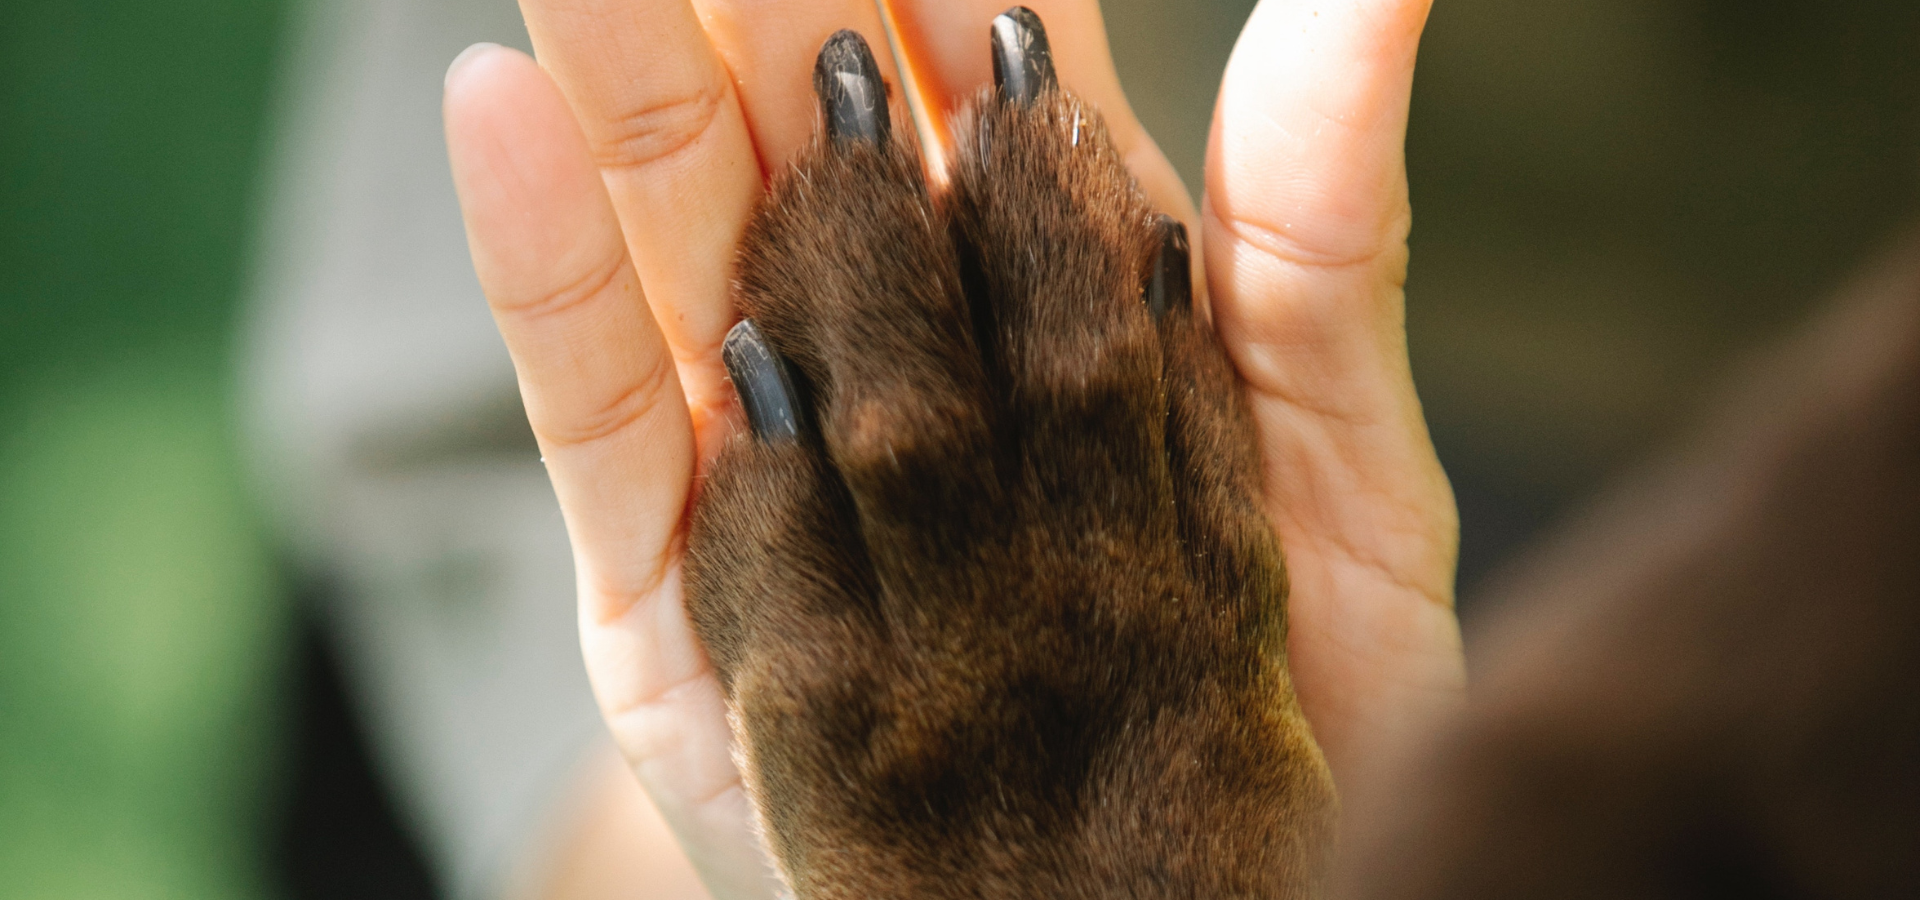 Human hand and dog paw doing a high five motion